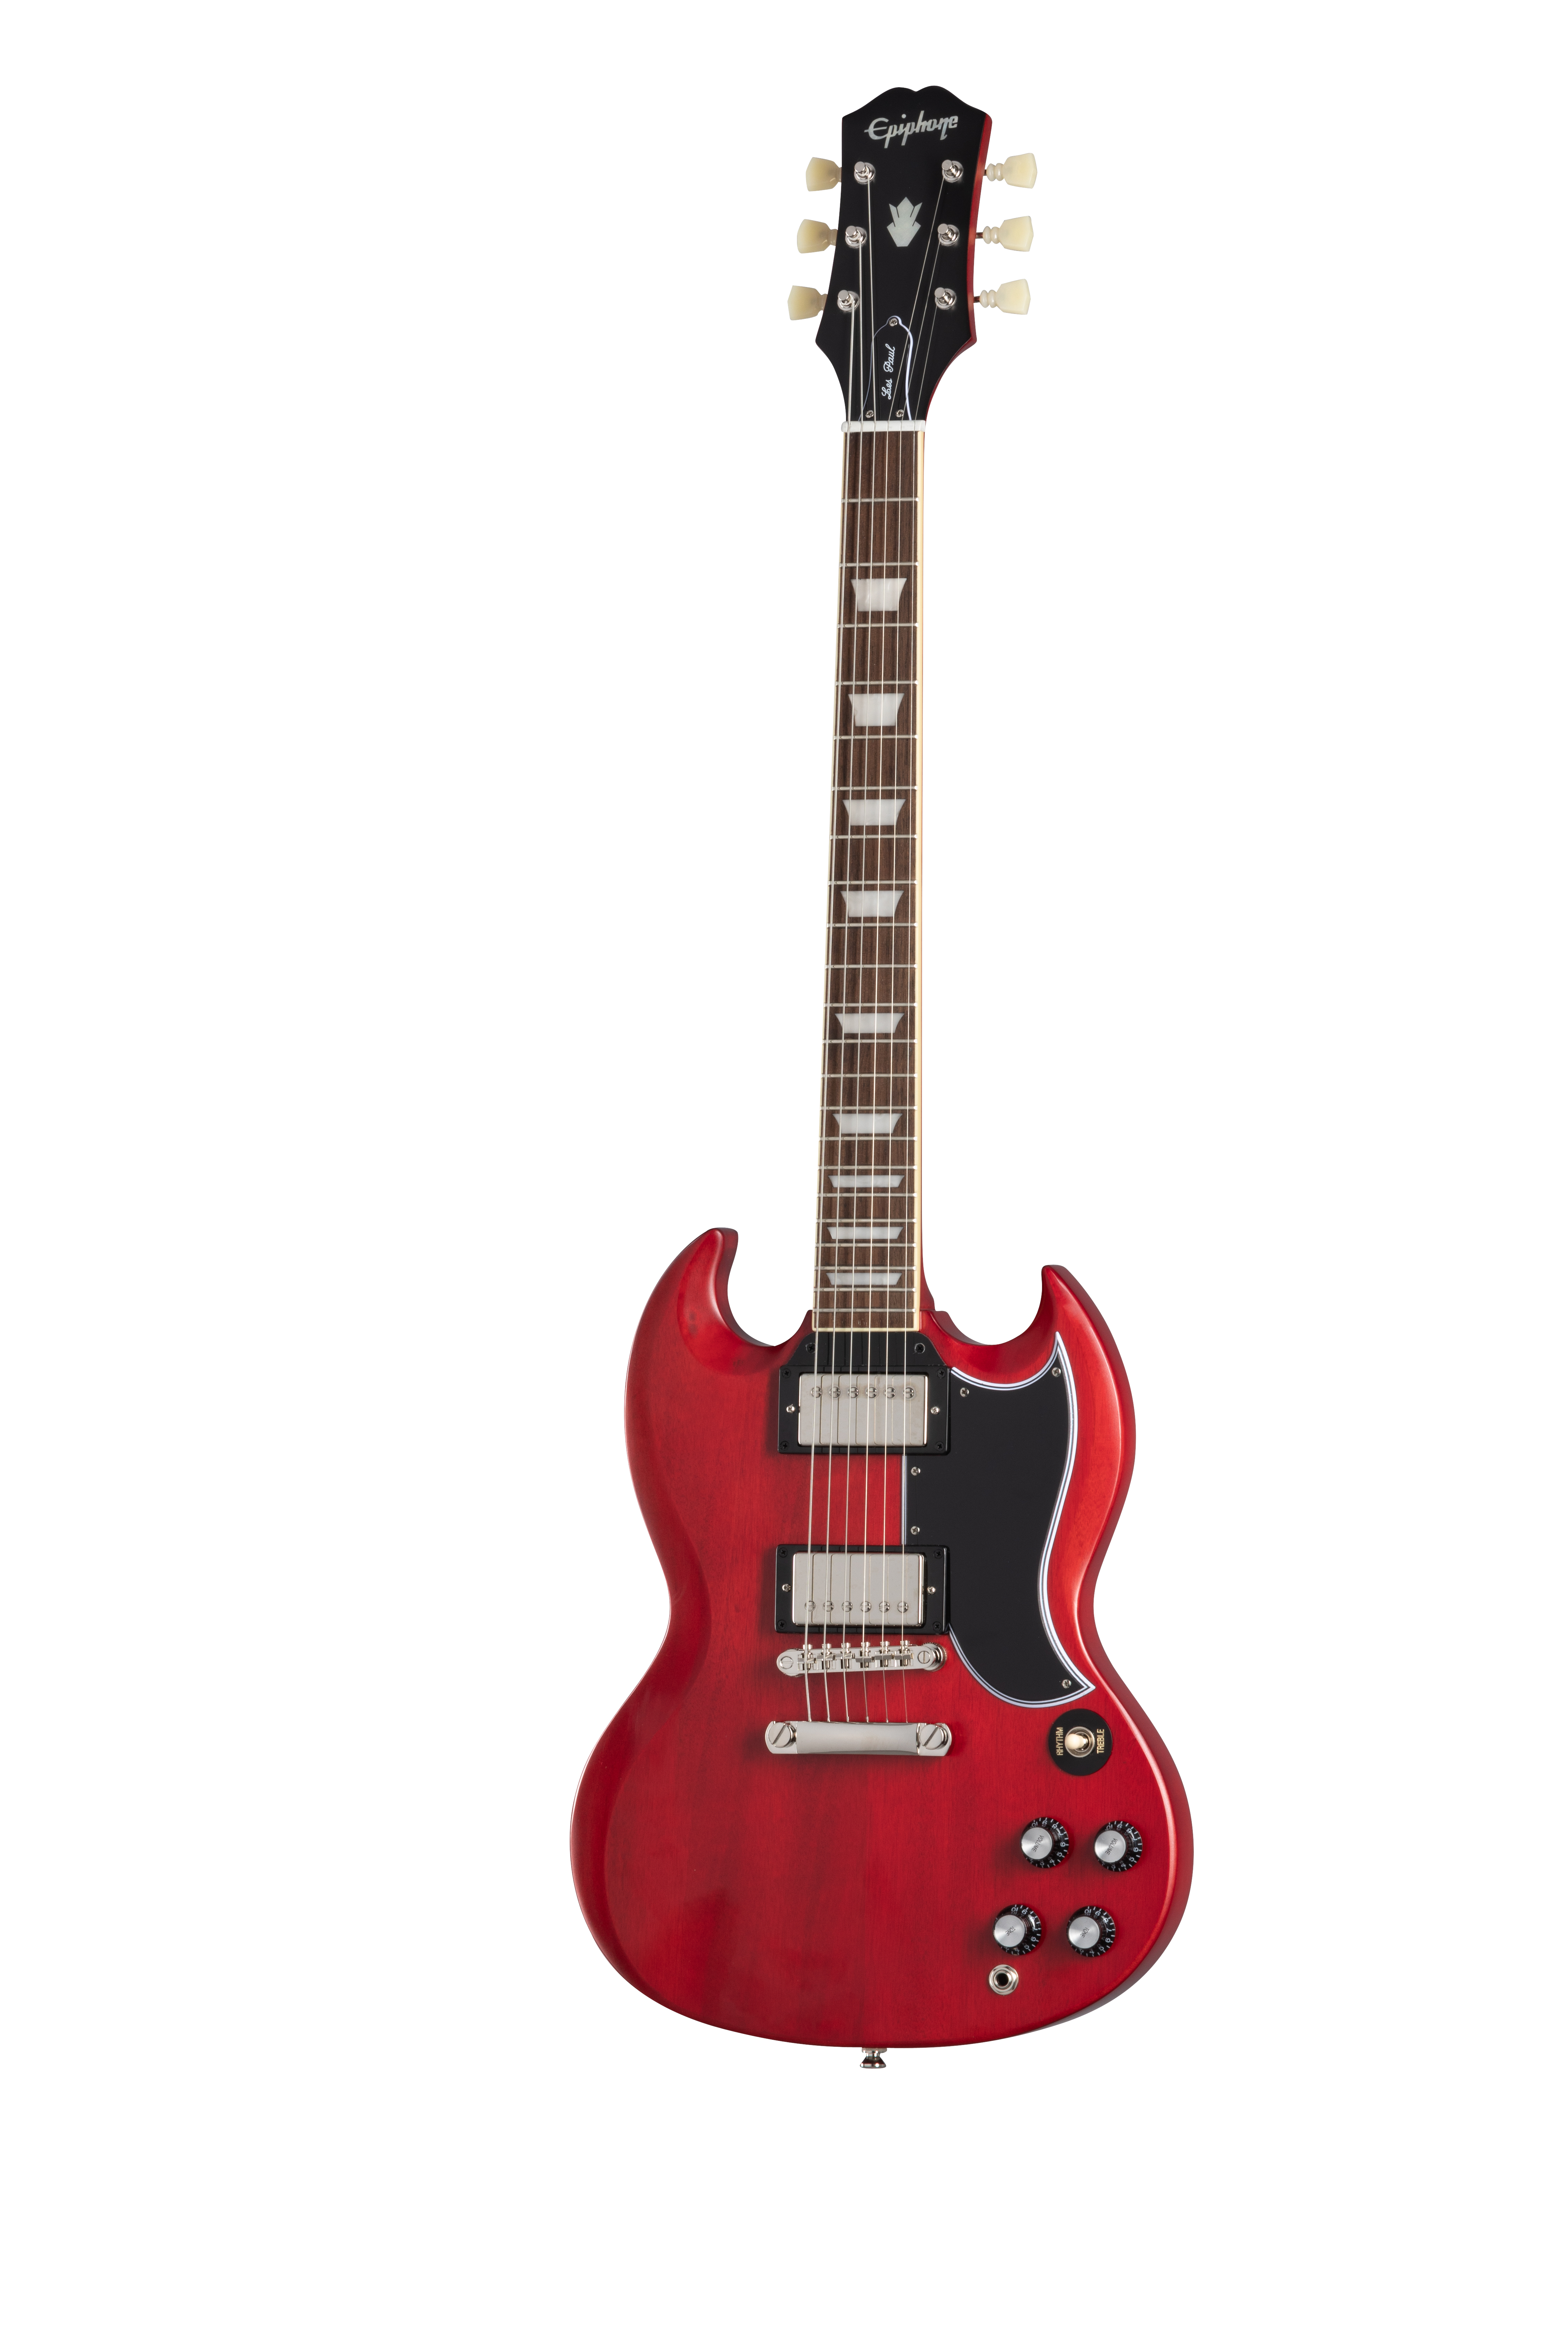 Epiphone | 1961 Les Paul SG Standard - Aged Sixties Cherry